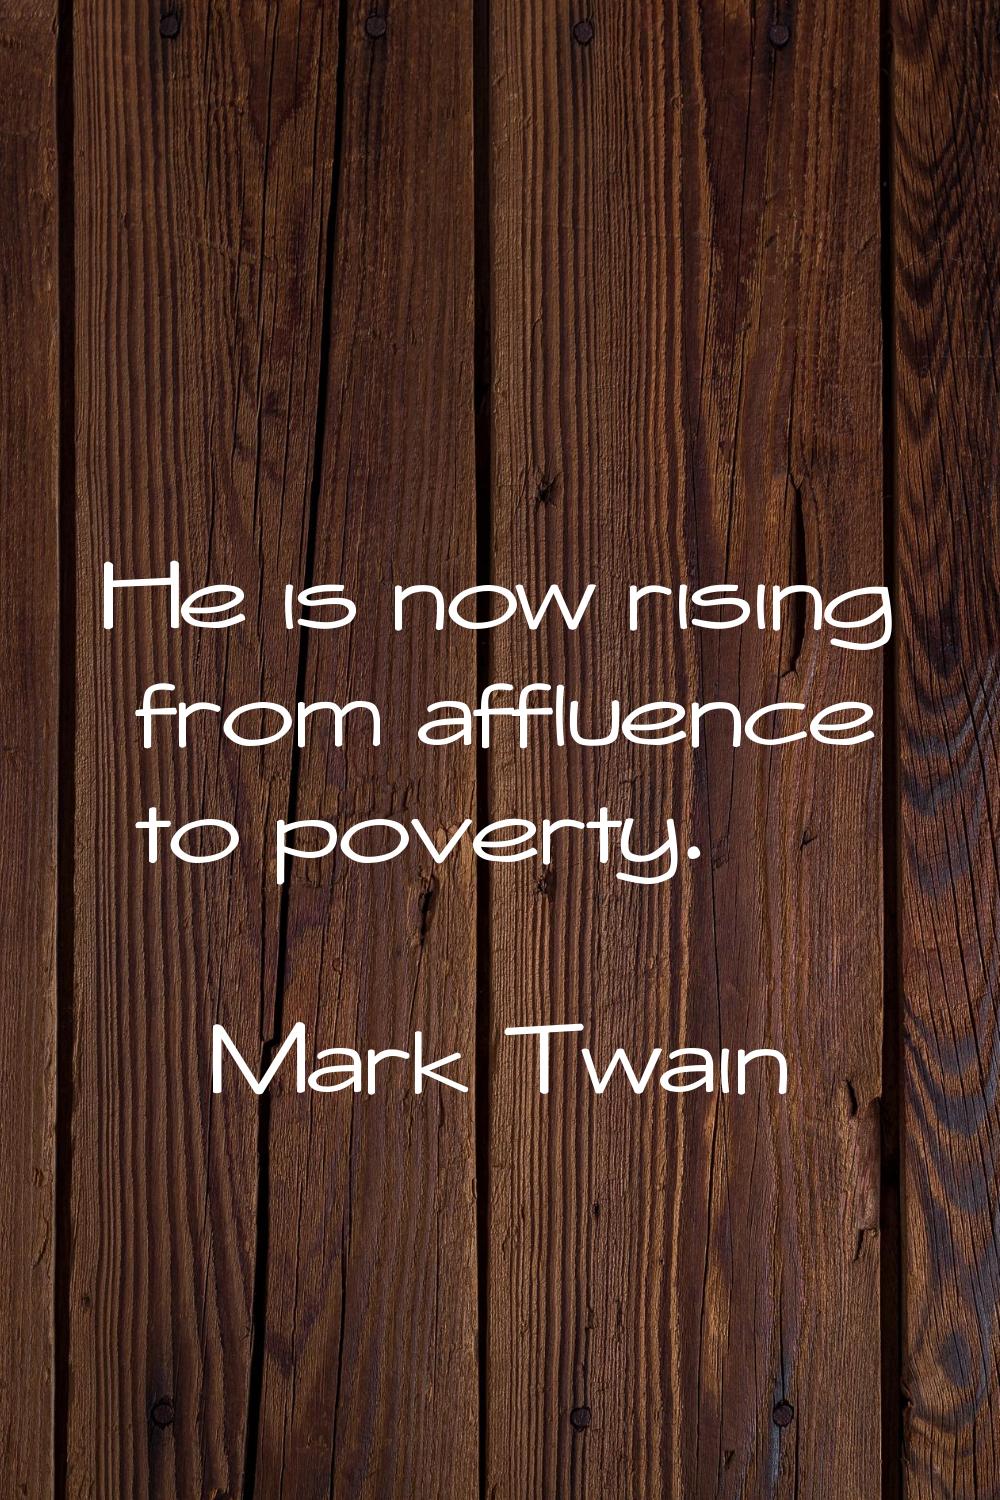 He is now rising from affluence to poverty.